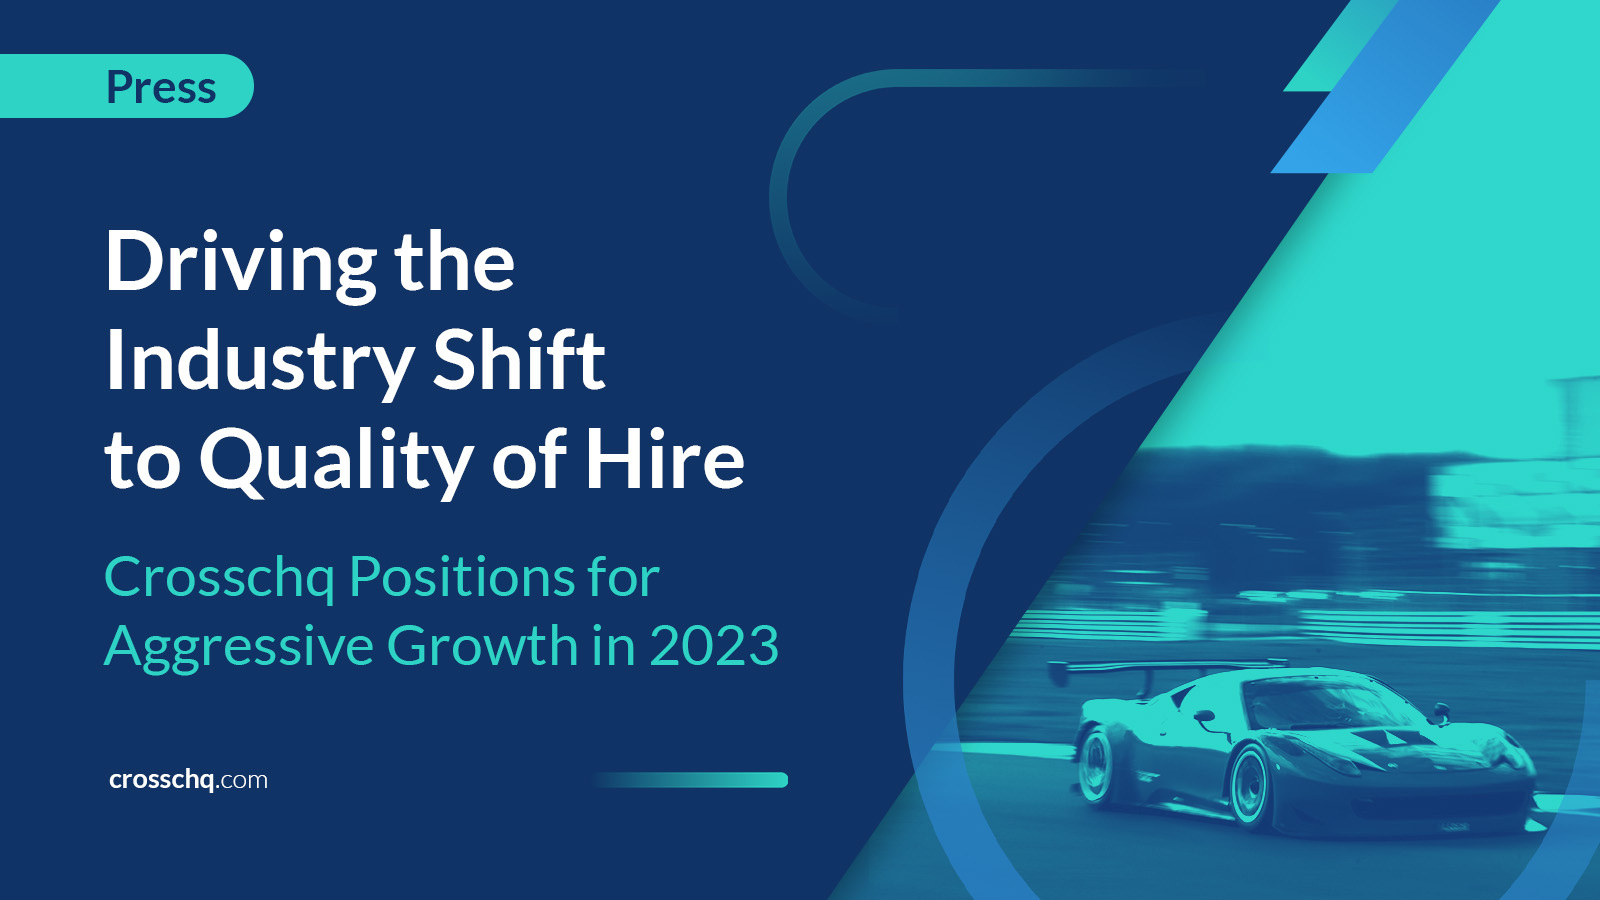 Driving the Industry Shift to Quality of Hire, Crosschq Positions for Aggressive Growth in 2023